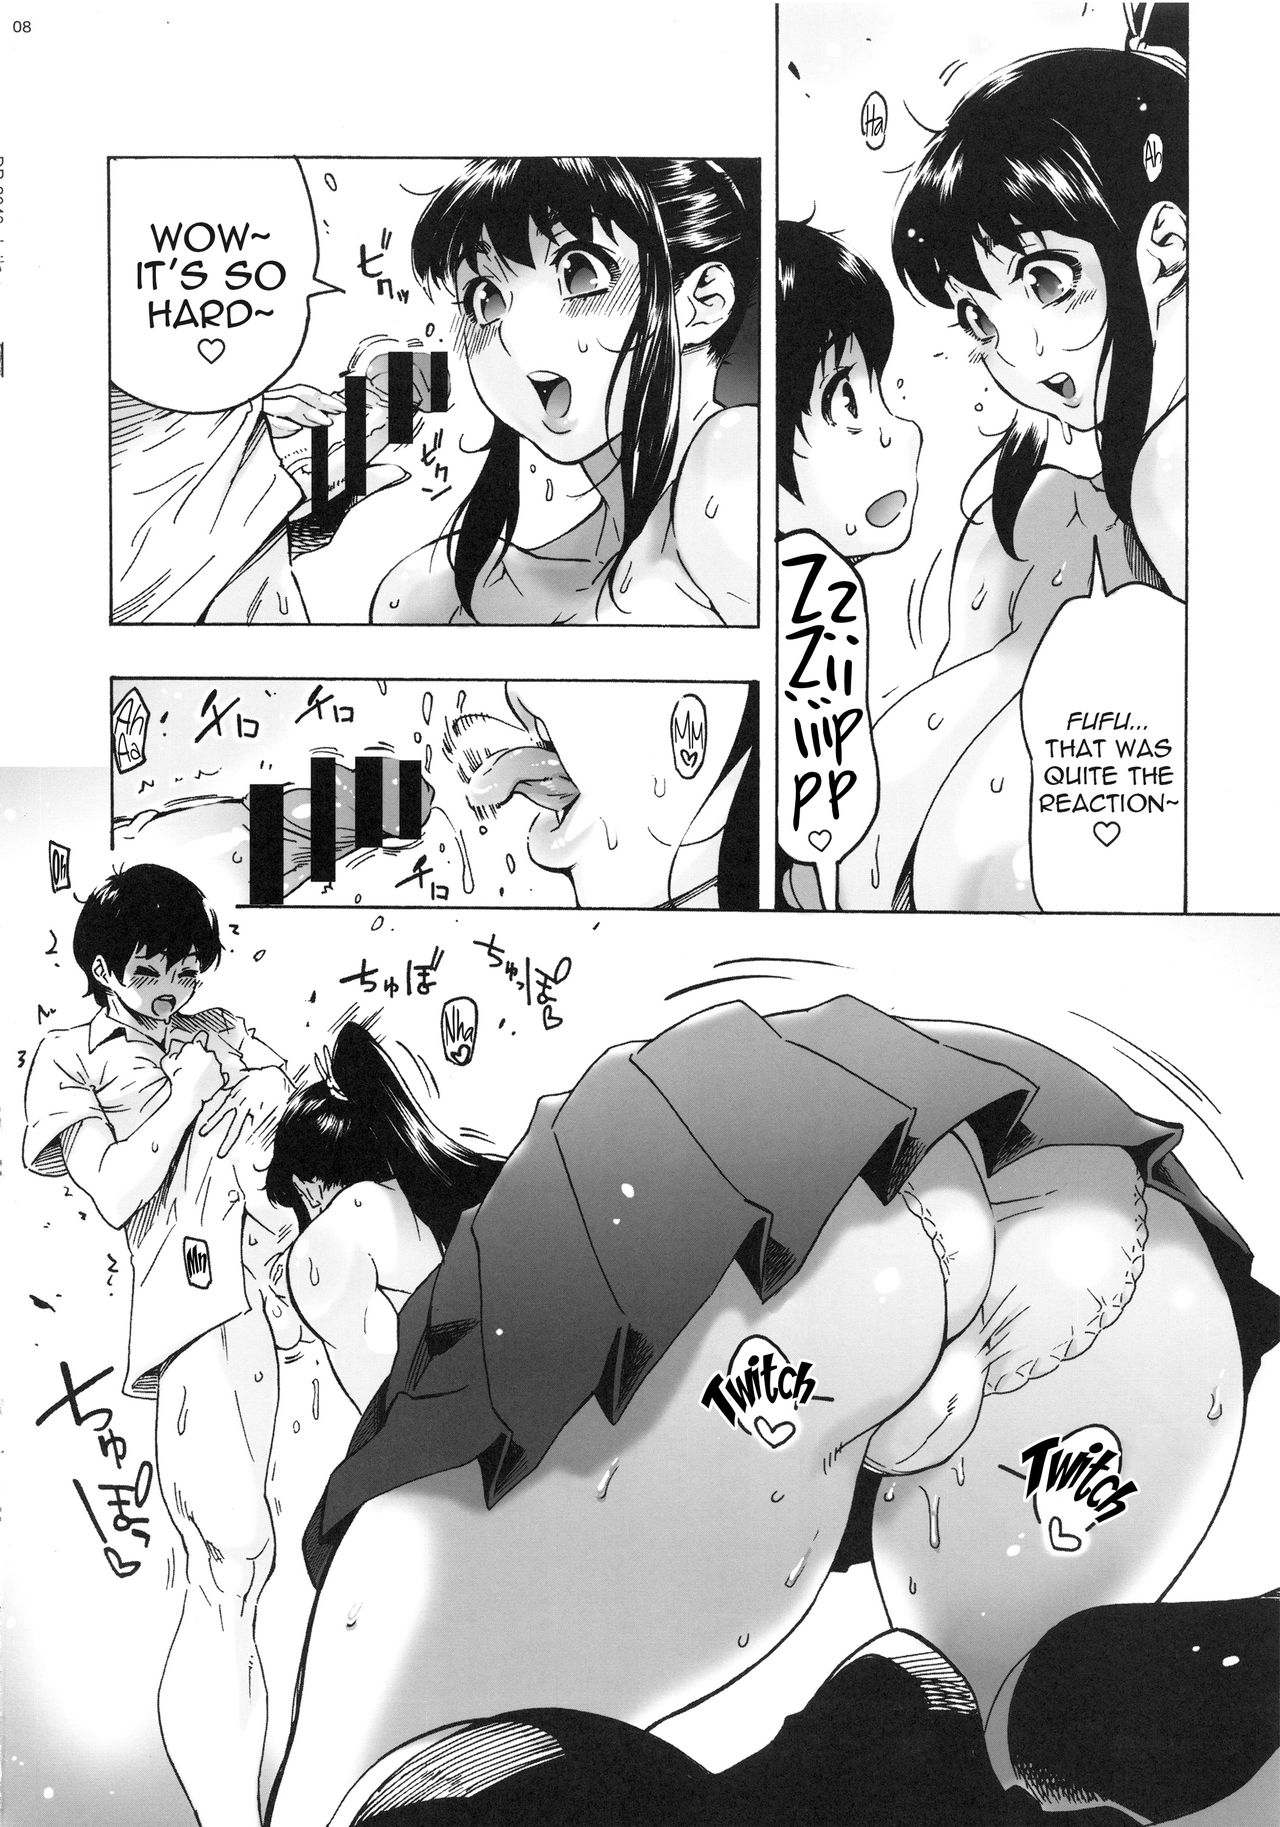 [Coochy-Coo (Bonten)] My Childhood friend is a JK Ponytailed Girl | With Aki-Nee 2 | AkiAss 3 | Trilogy [English] {Stopittarpit} page 9 full